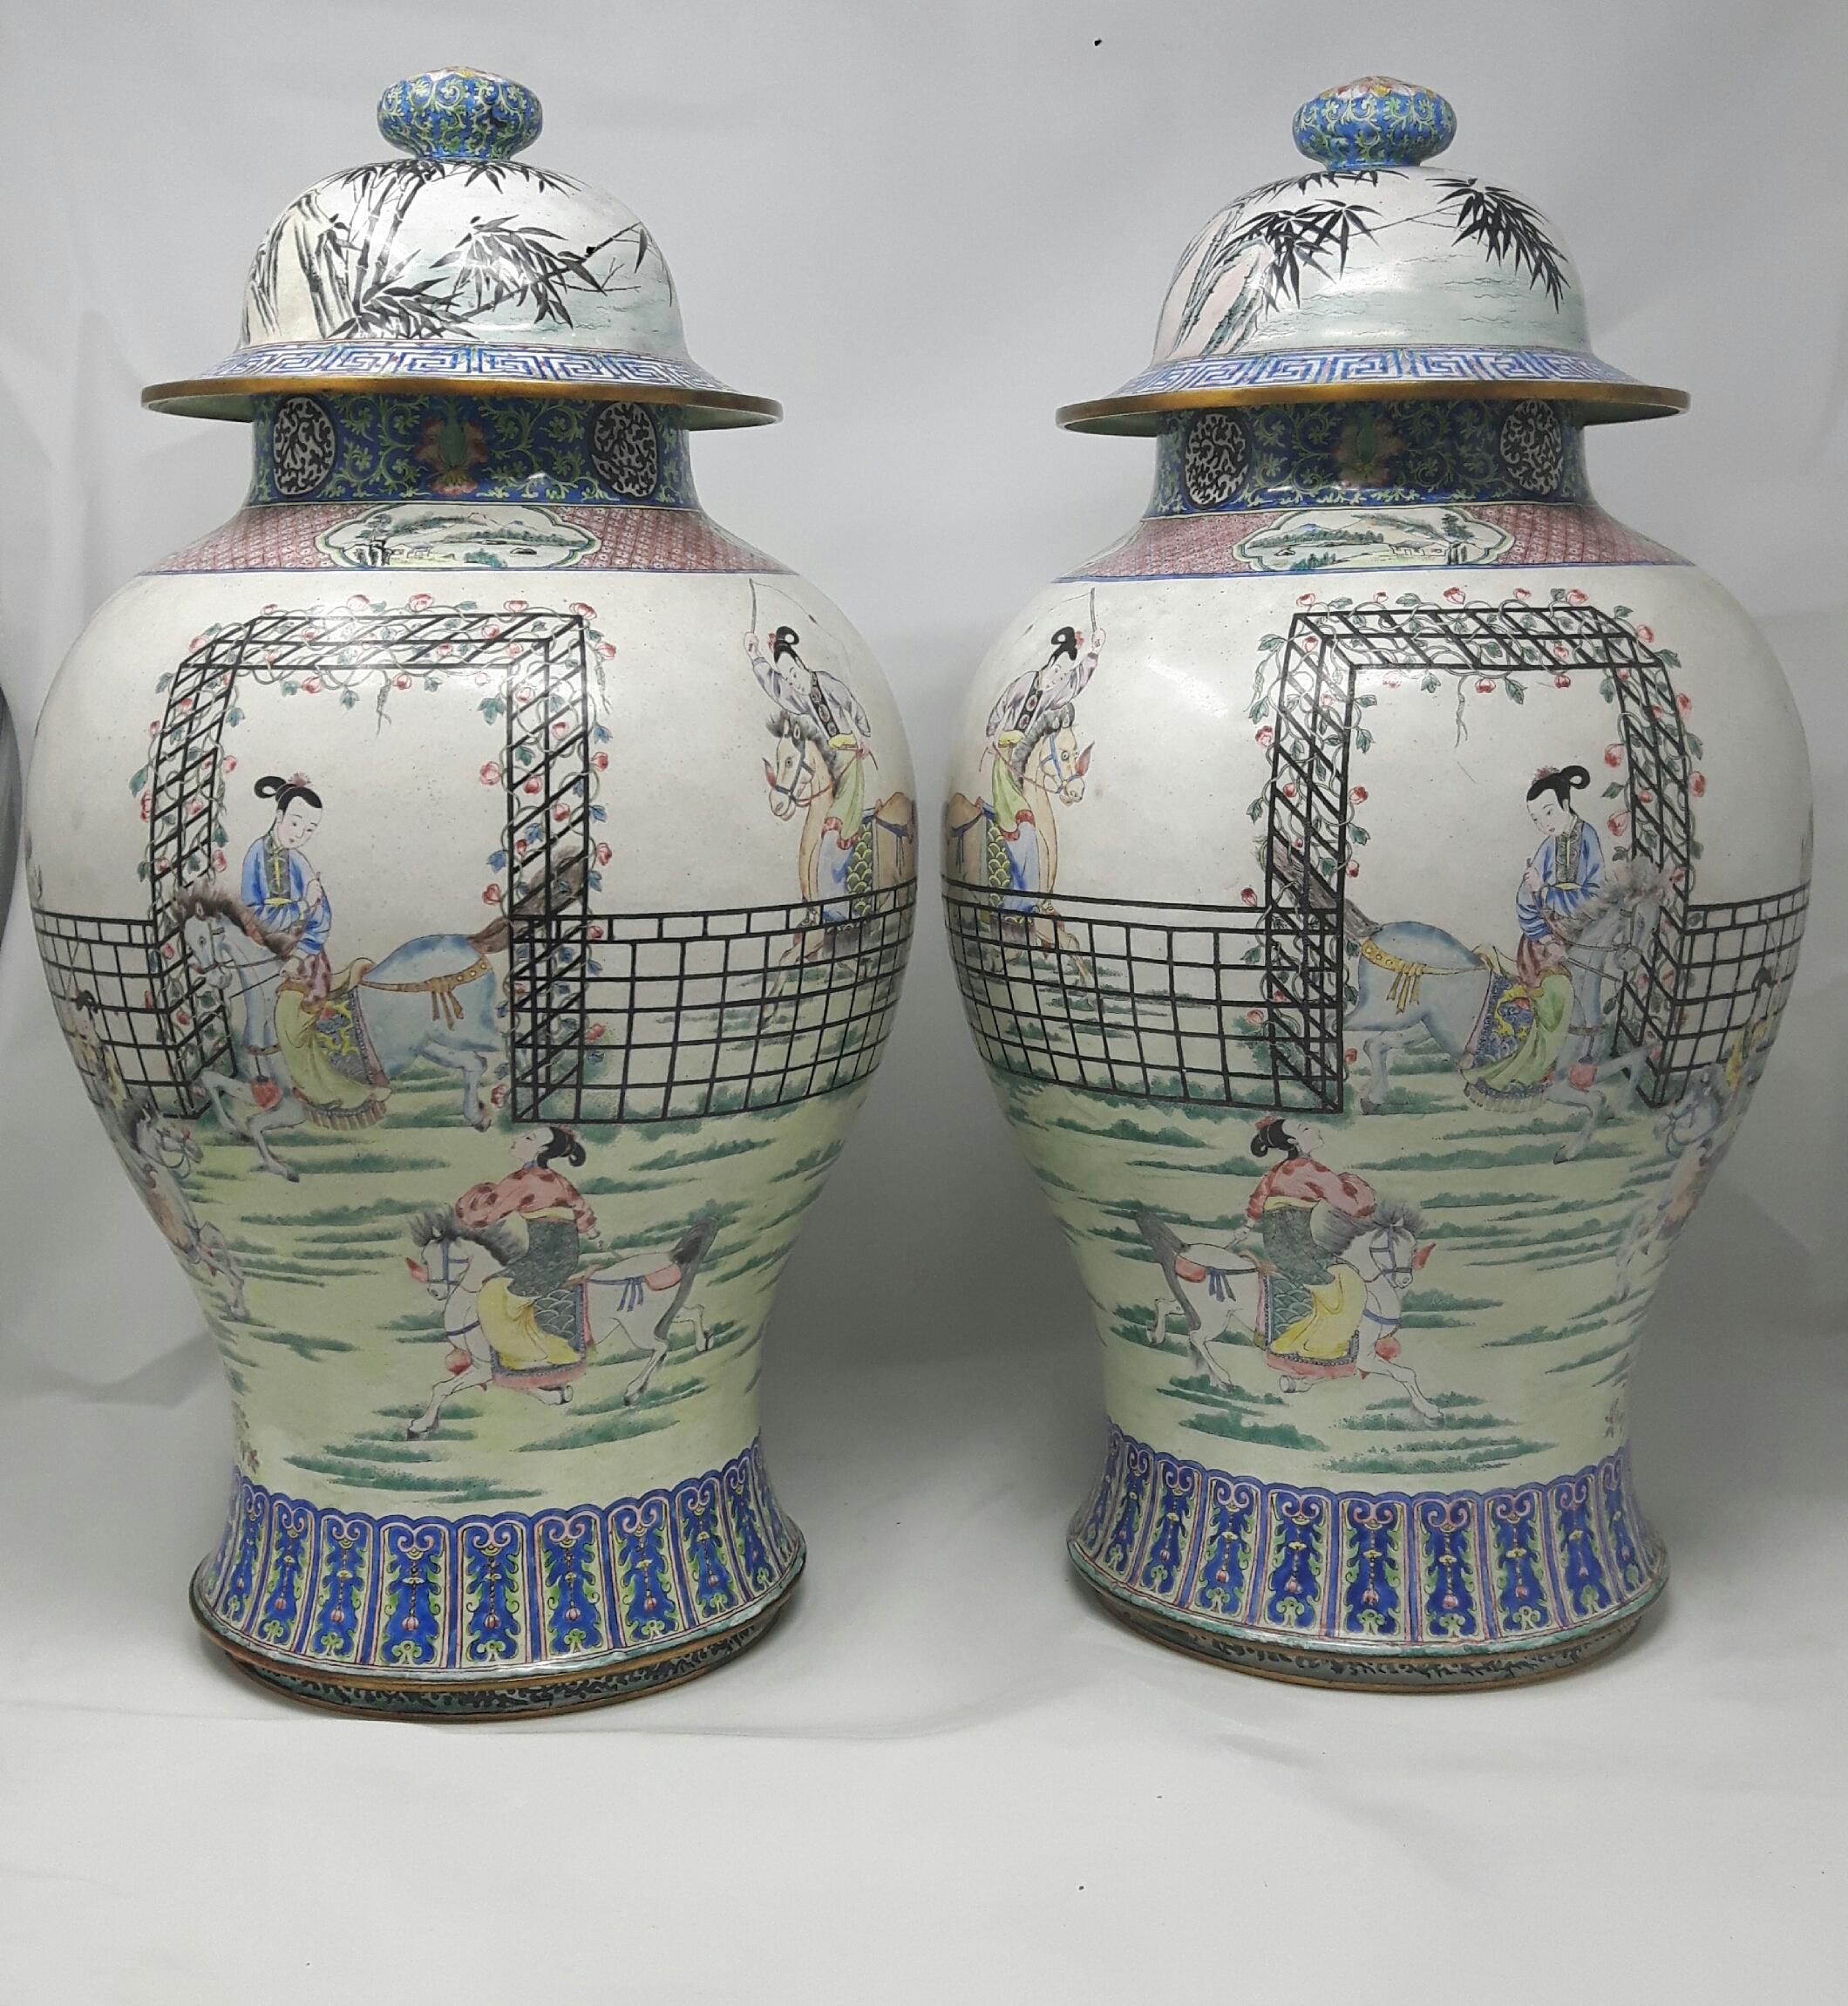 Pair of Canton enamel covered jars, China.
For export, baluster-form, the body decorated with continuous scenes of the female generals from the Yang family training, riding horses and practicing with bamboo swords, bordered above and below by